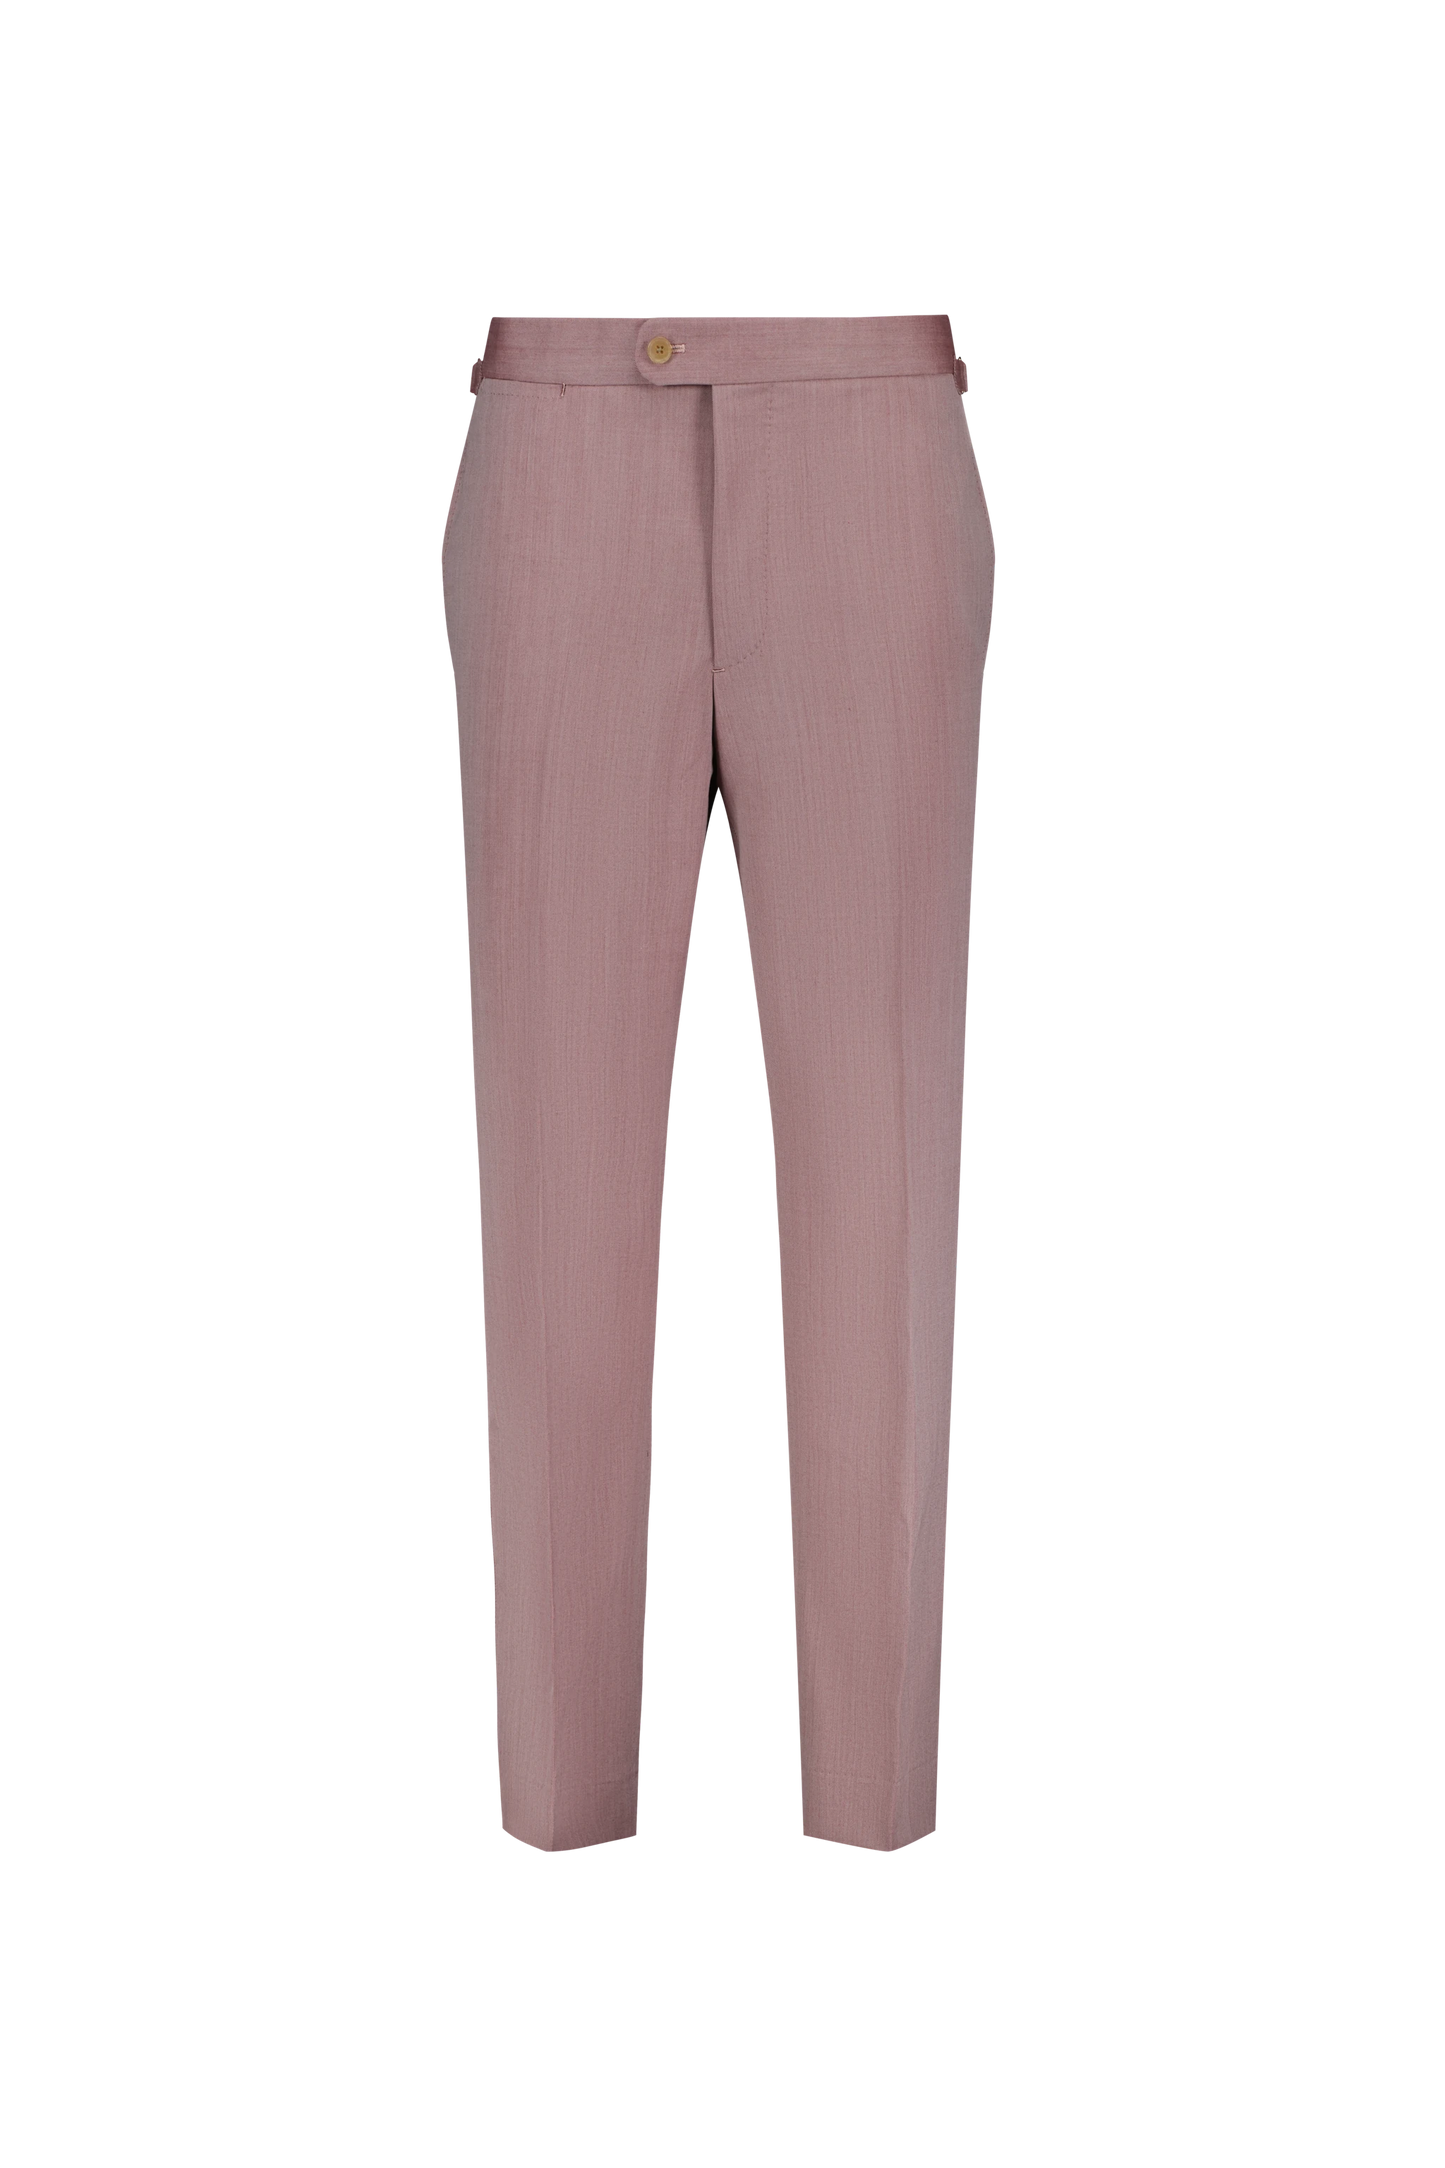 Trousers Dublin pink Wool and Cashmere twill